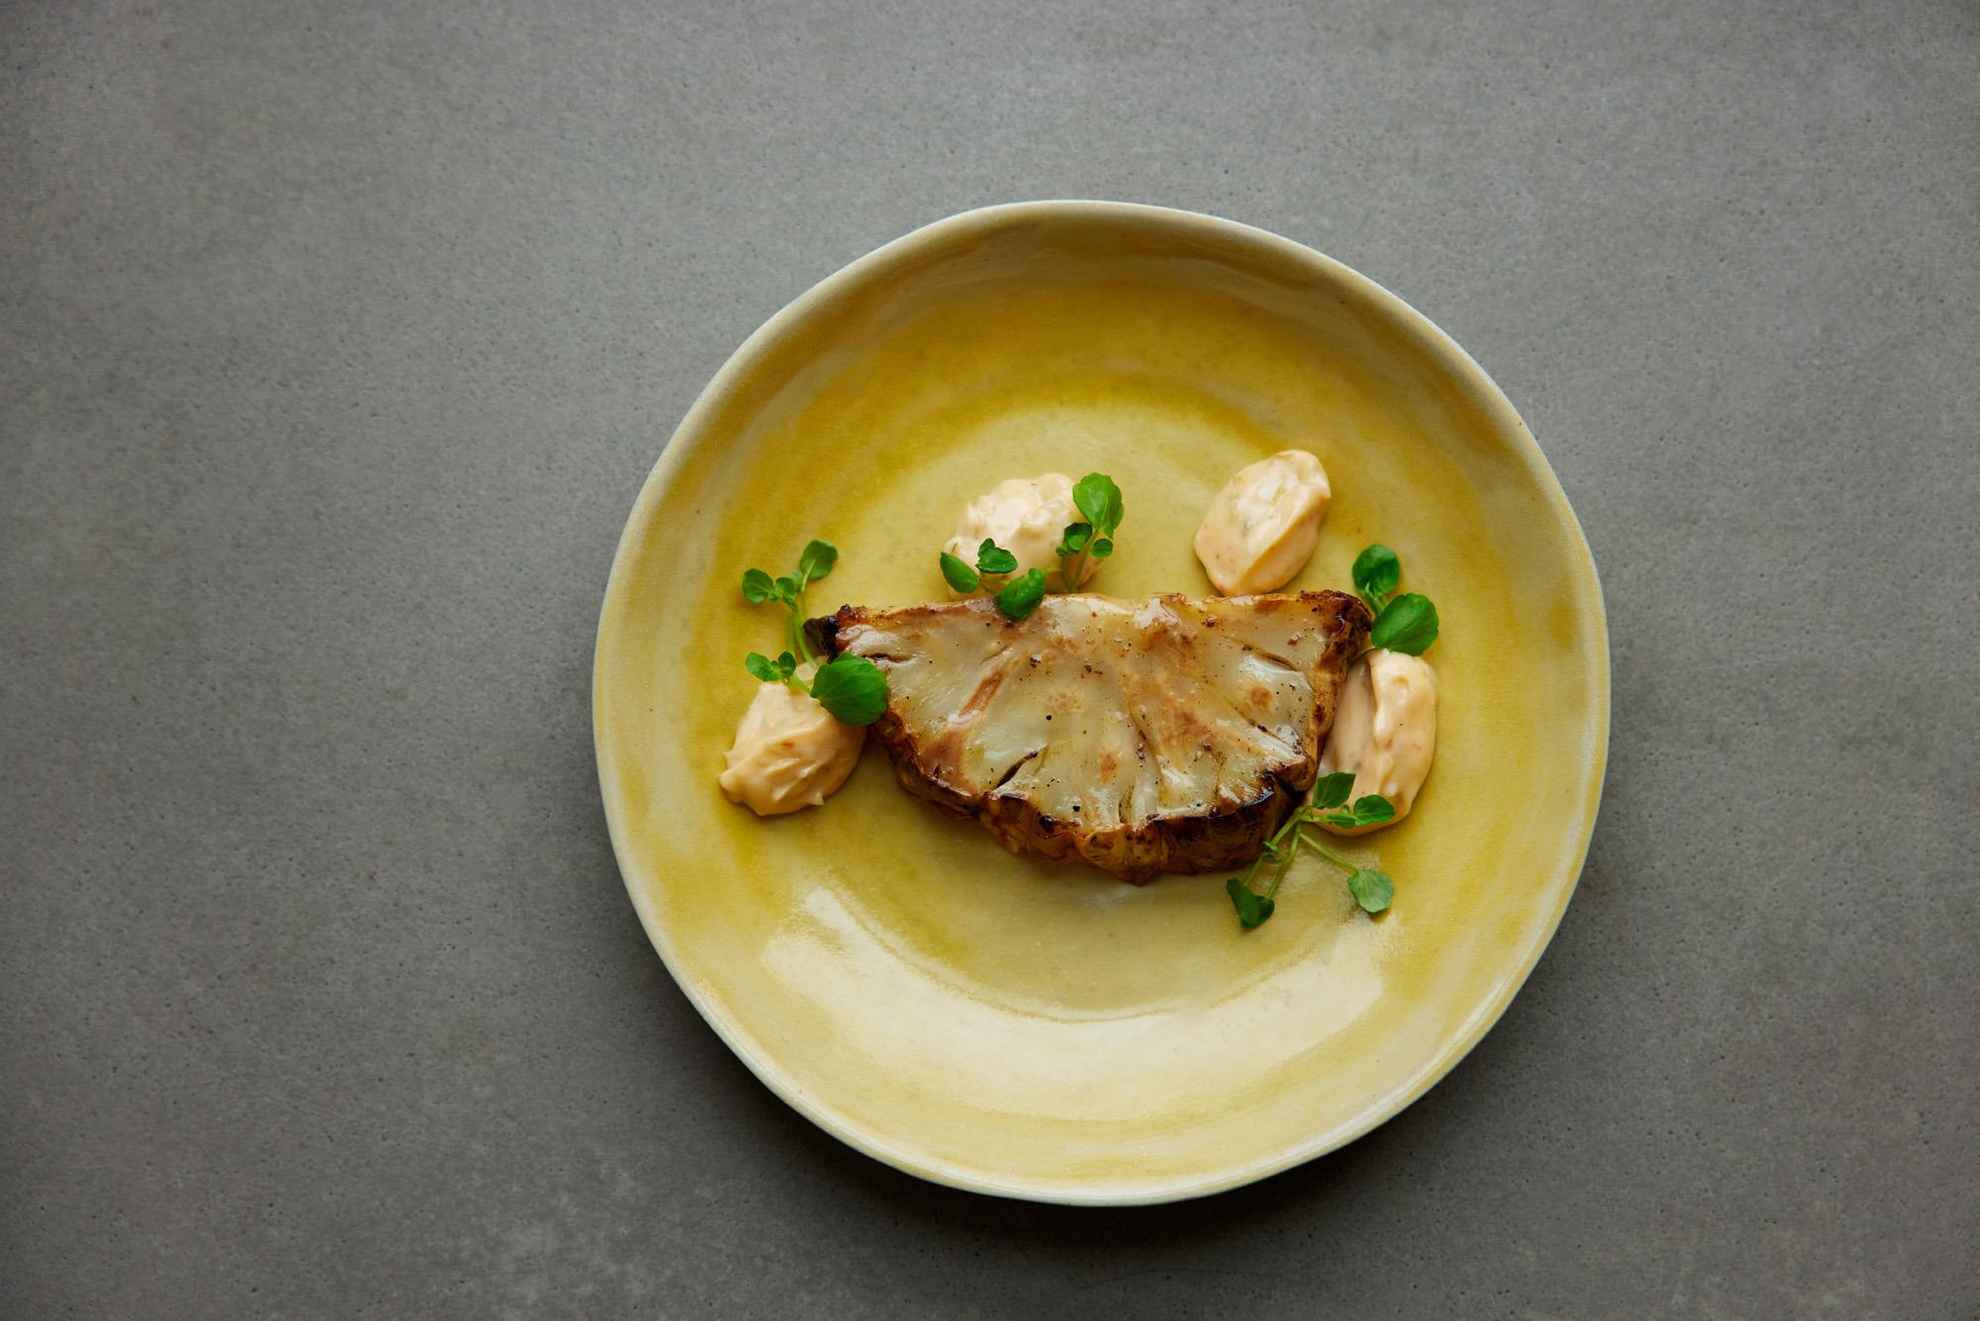 A yellow plate with a piece of baked cauliflower.